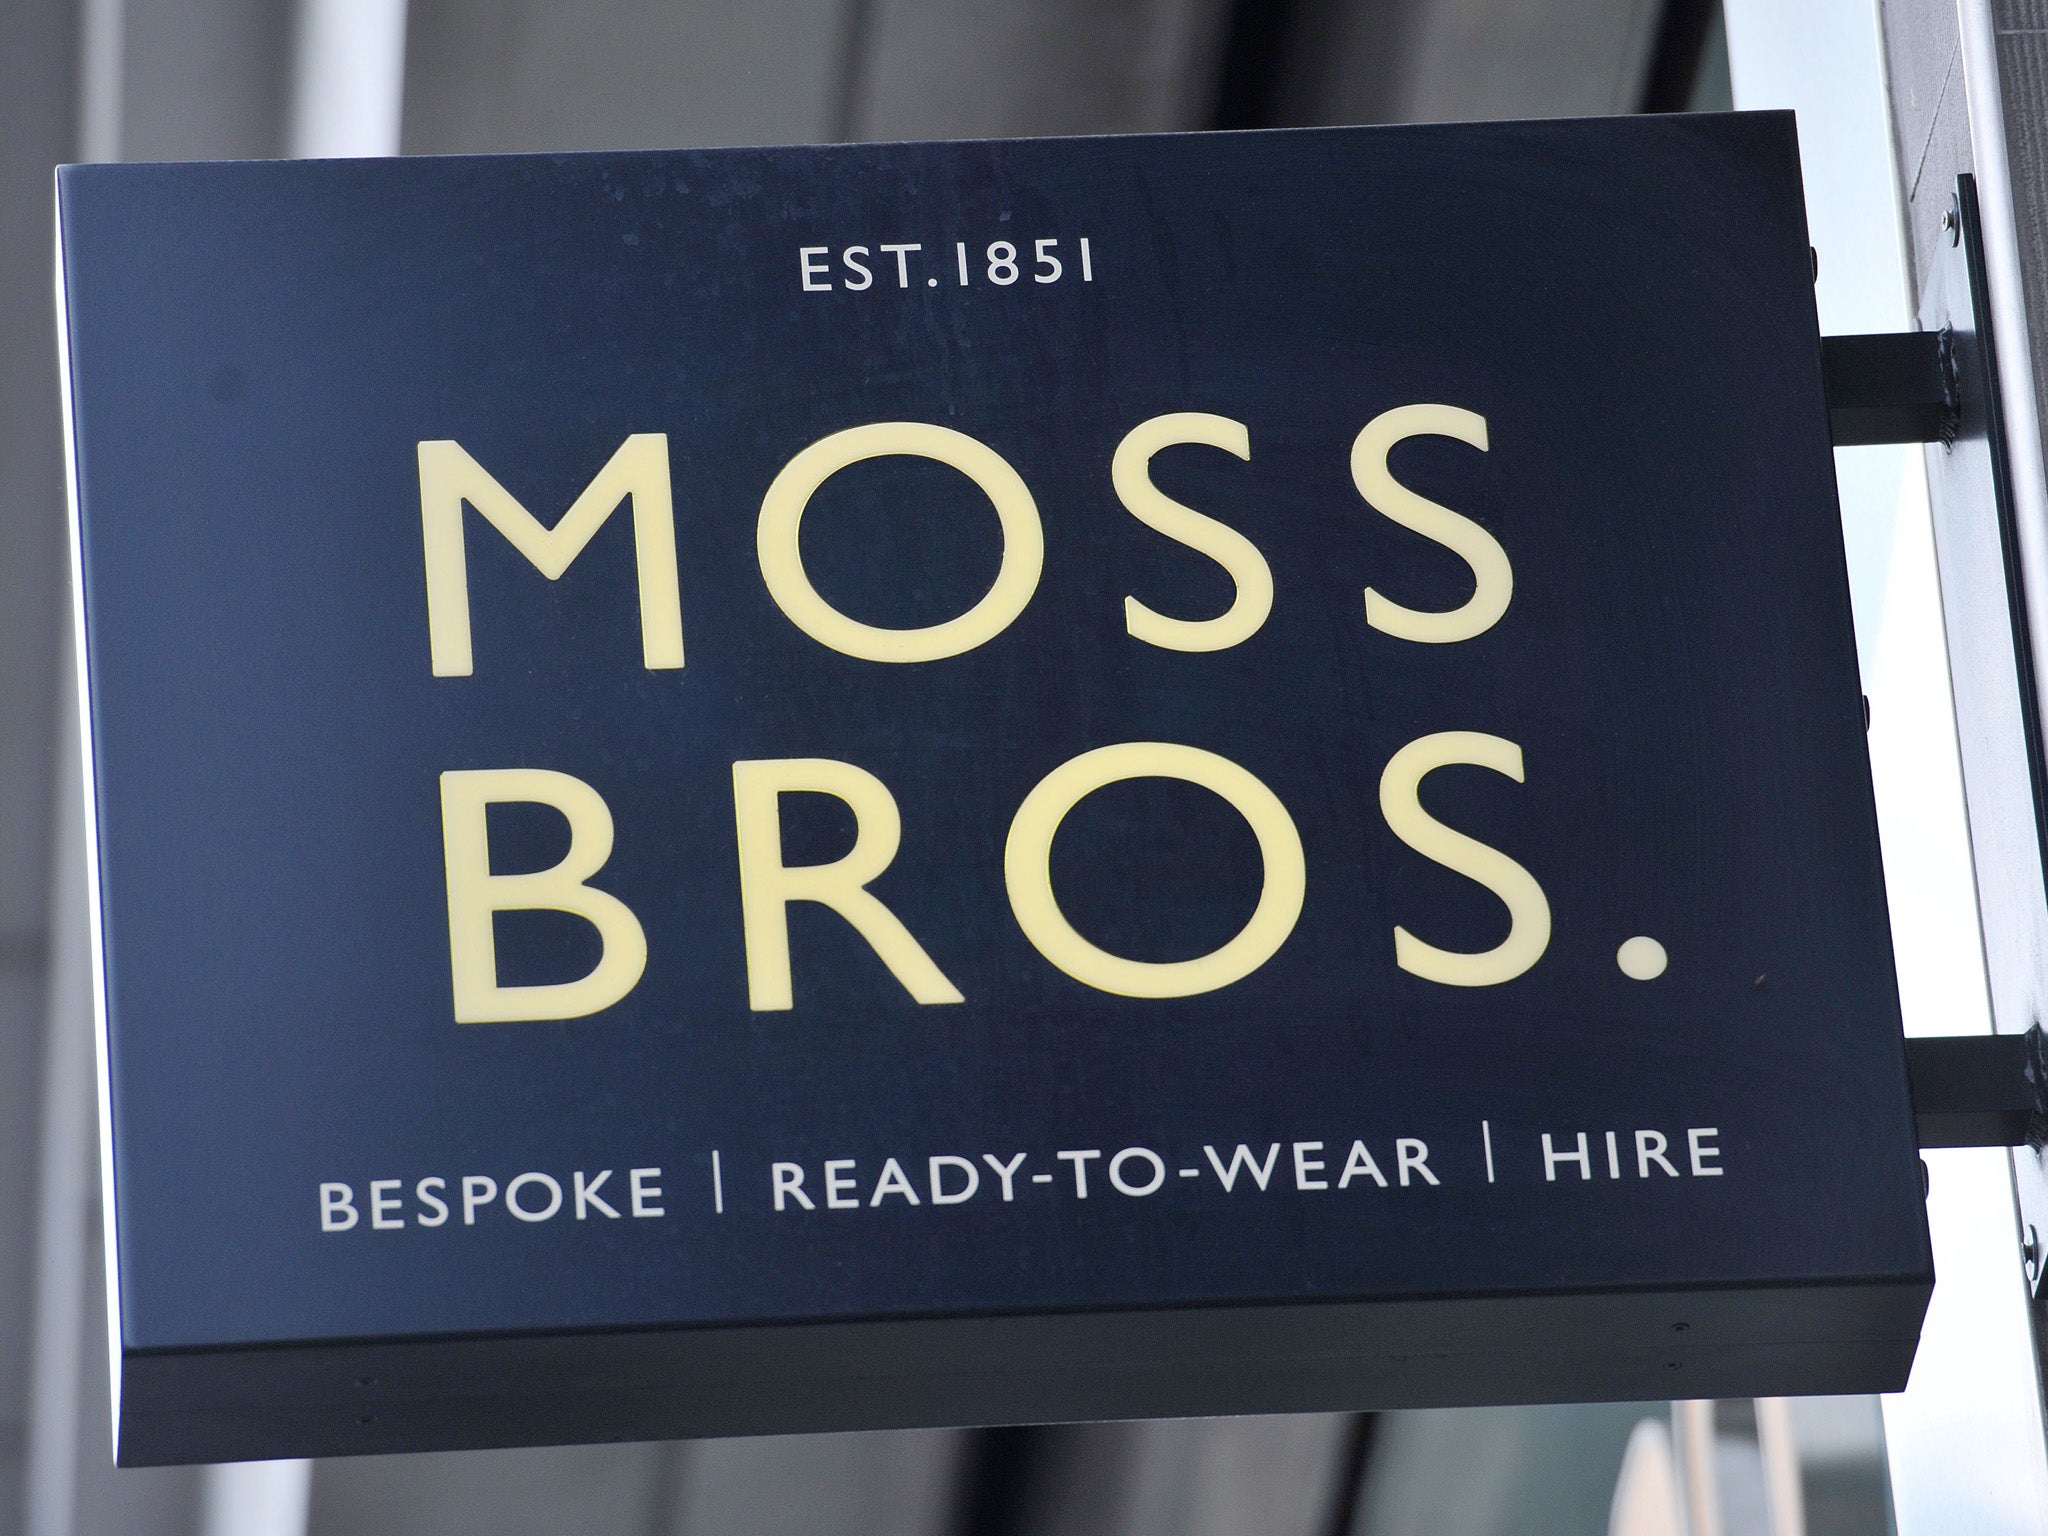 Moss Bros has 129 stores in the UK